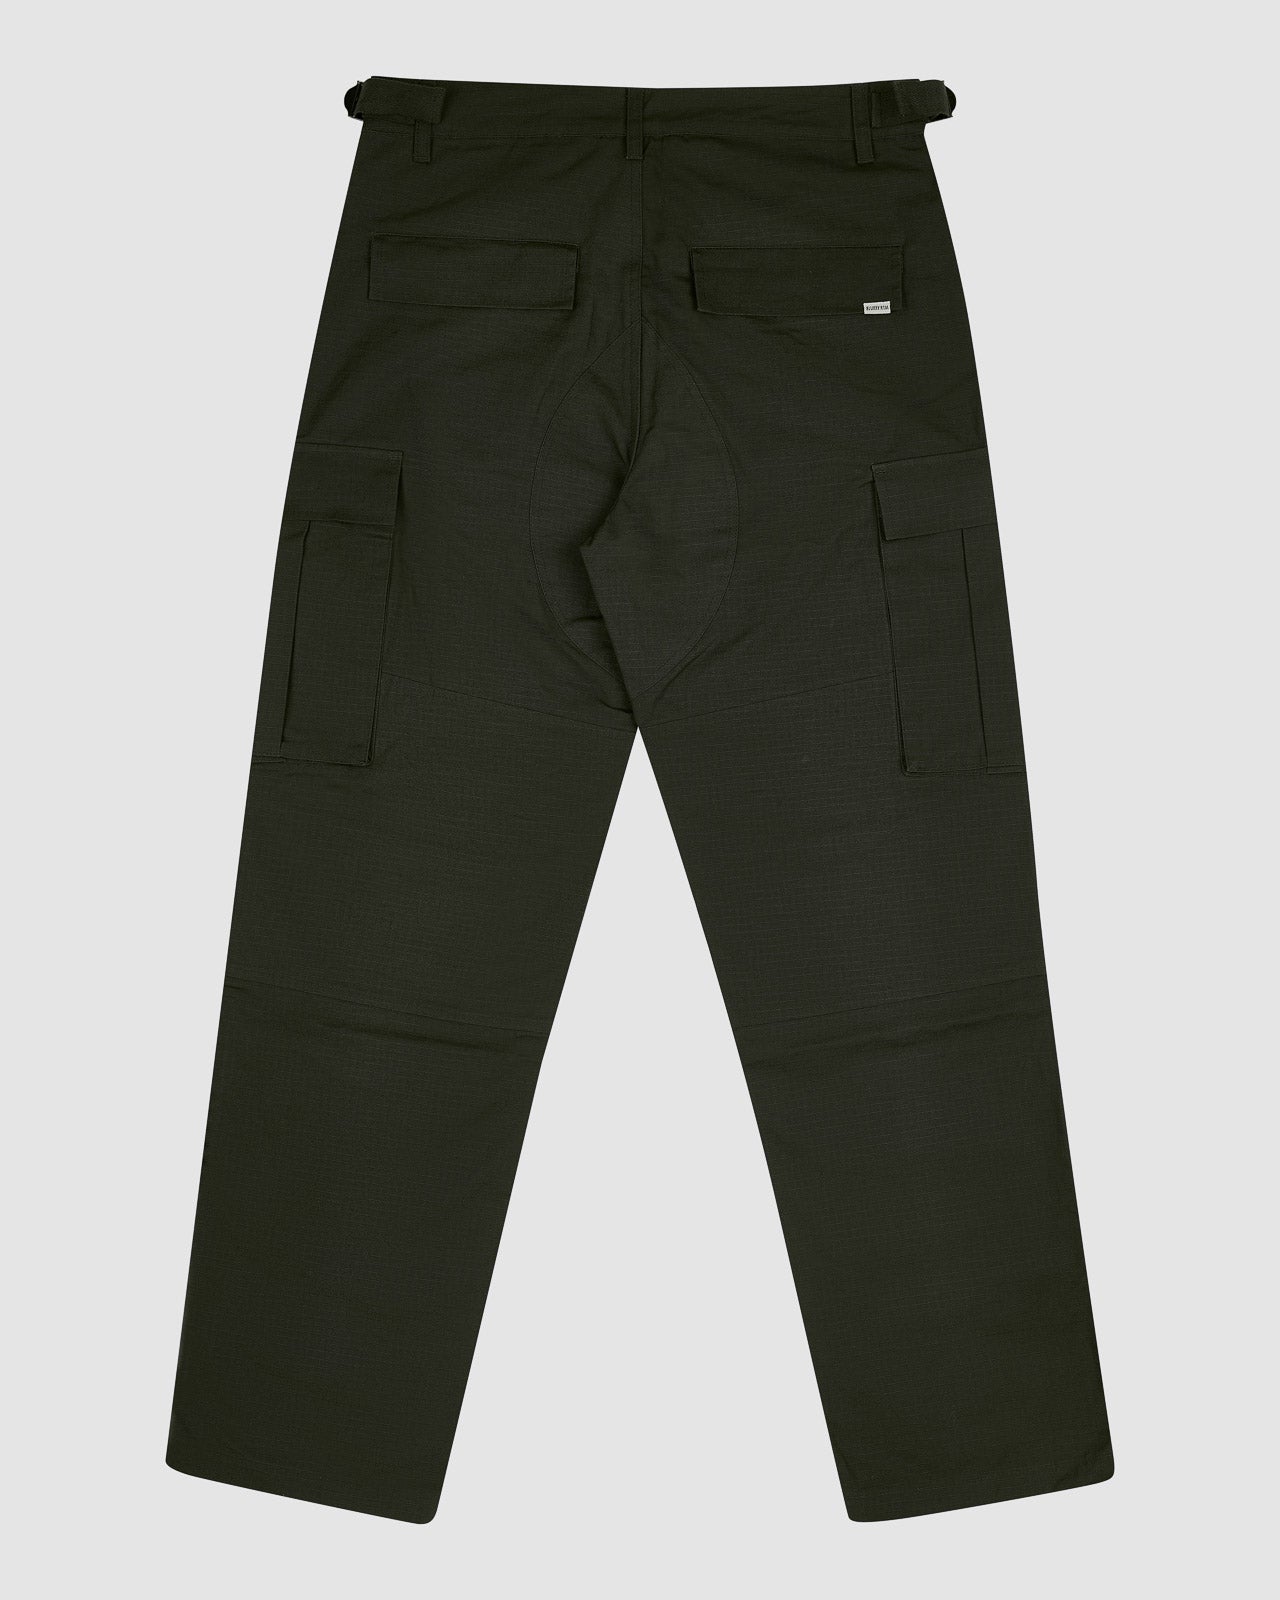 BLURRY RTM Cargo Pants (Army Green)